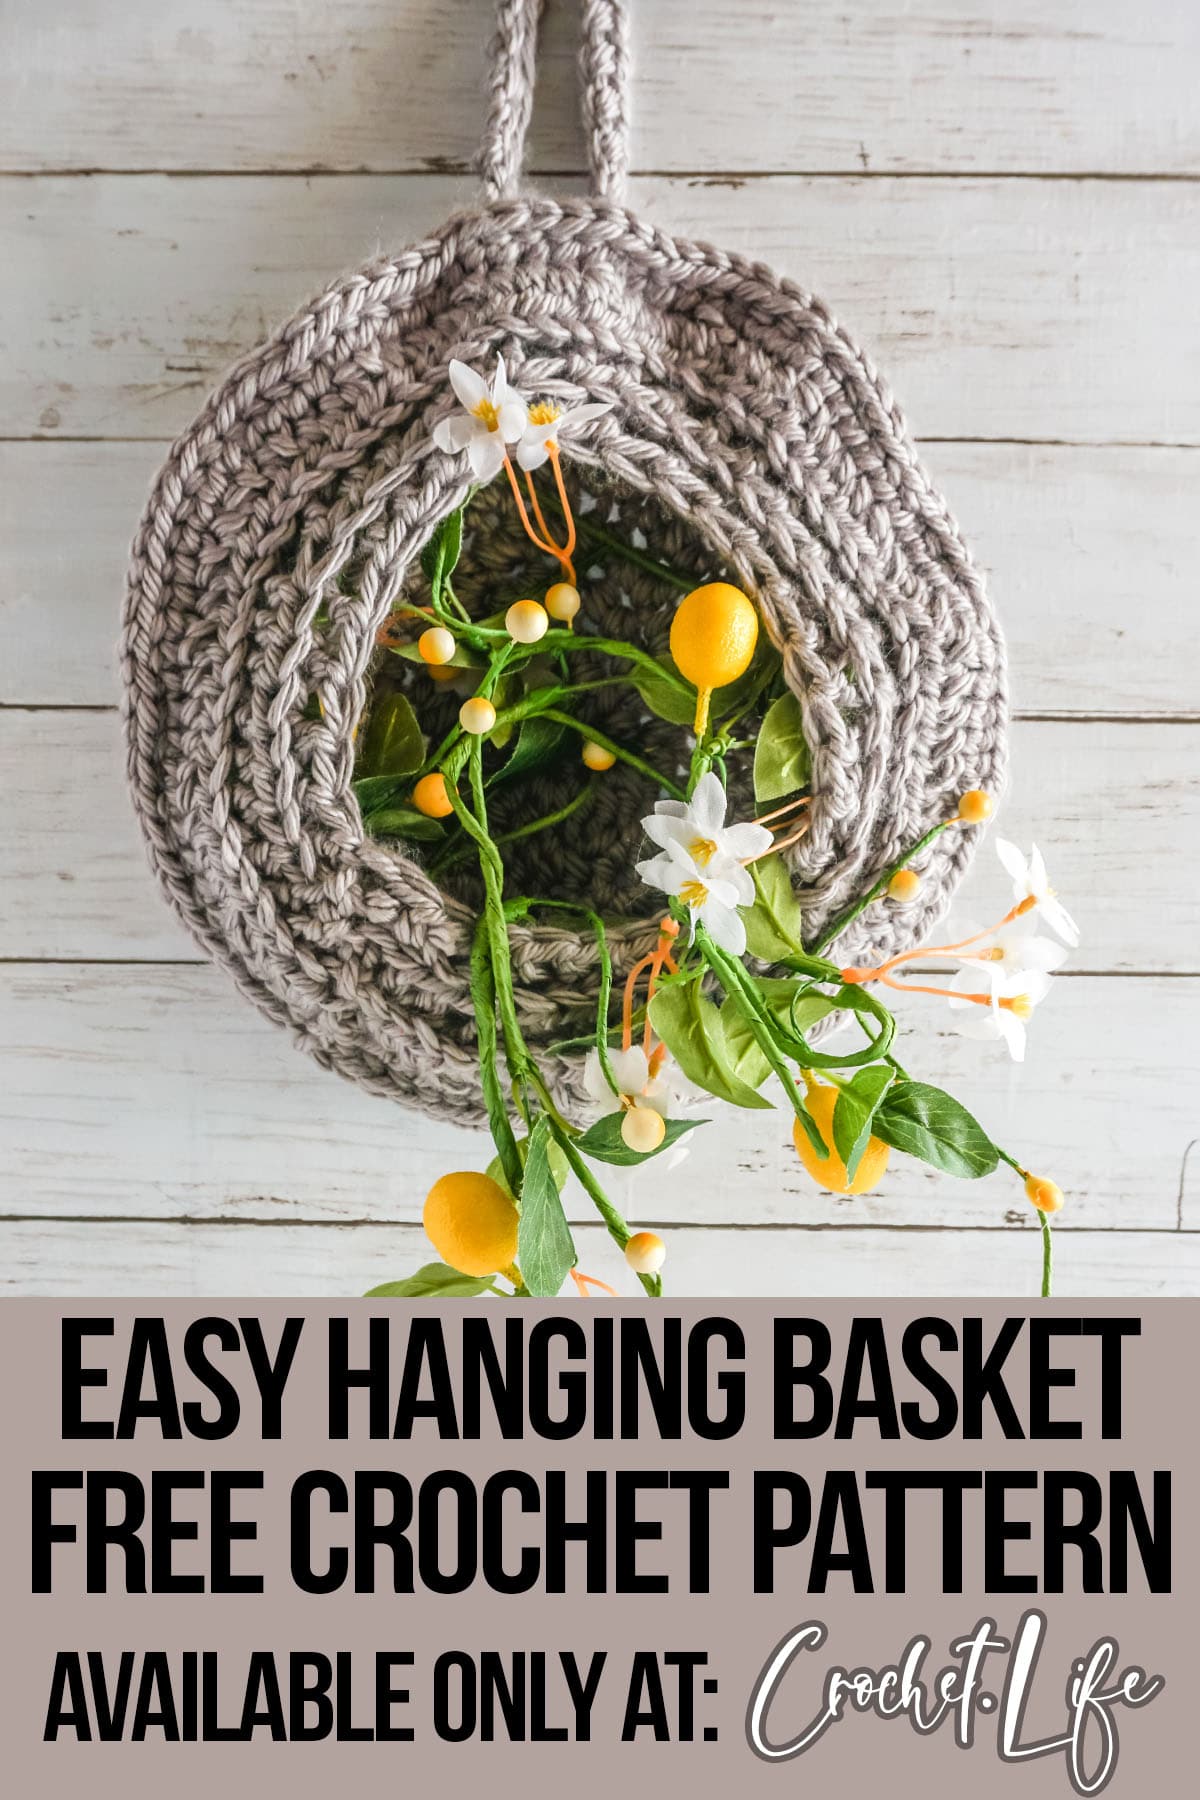 wall basket free crochet pattern with text which reads easy hanging basket free crochet pattern